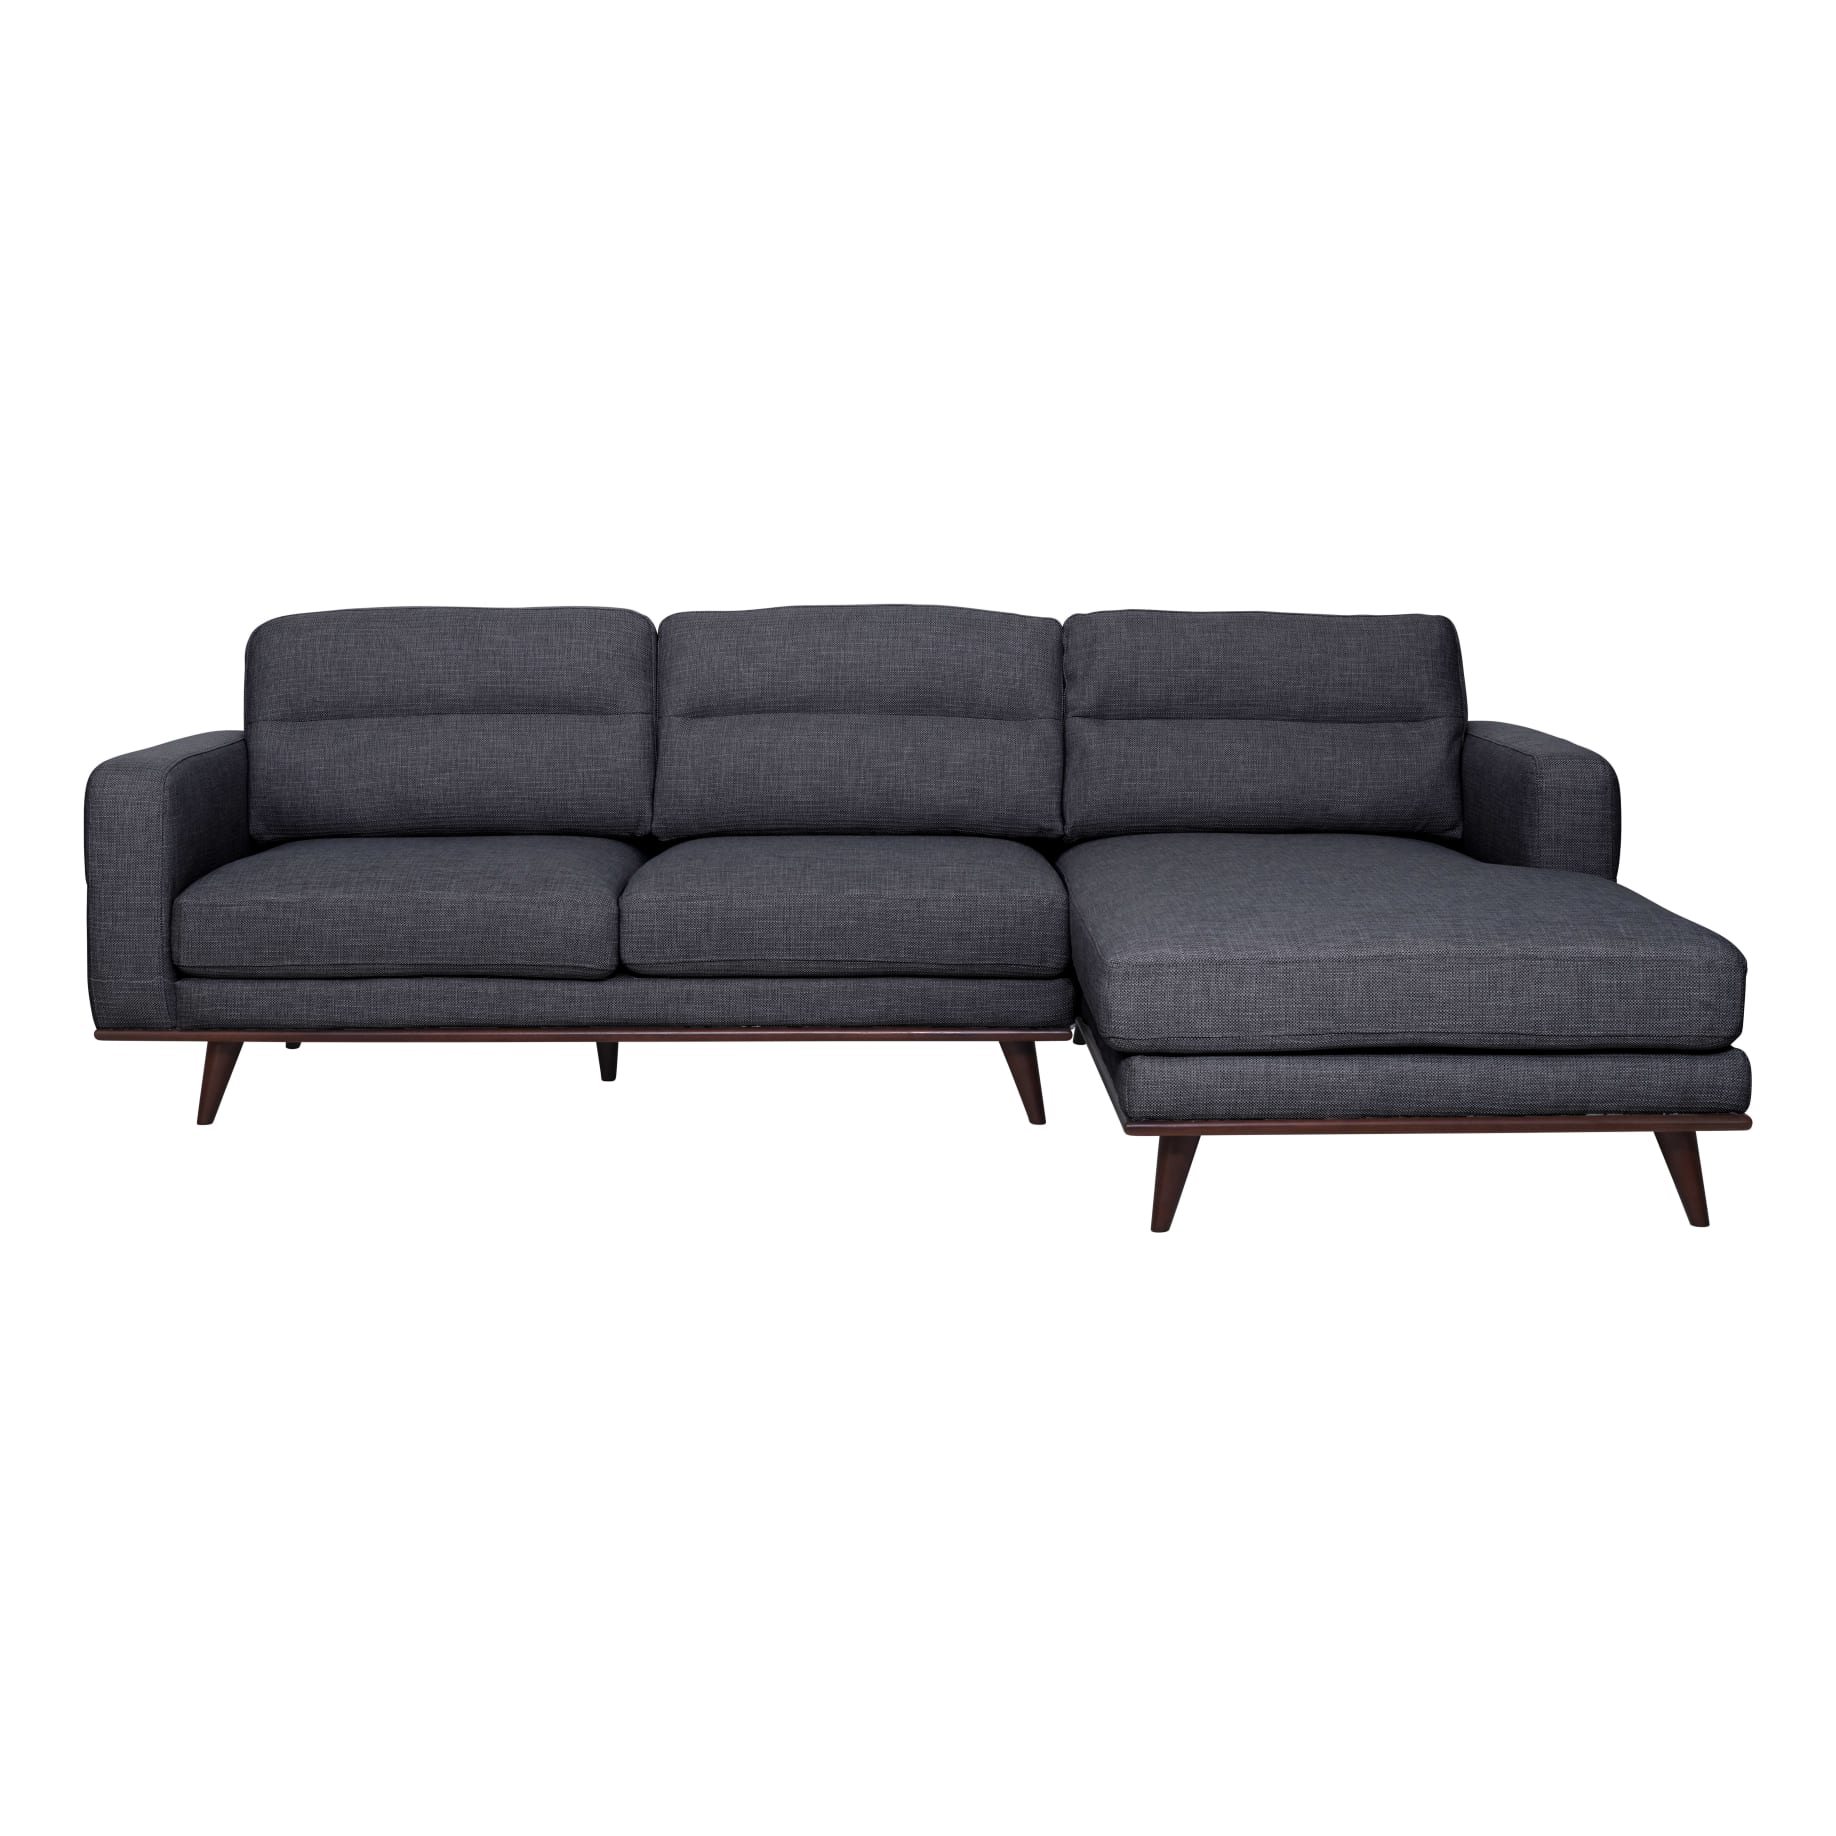 Astrid 2.5 Seater Sofa + Chaise RHF in Talent Charcoal